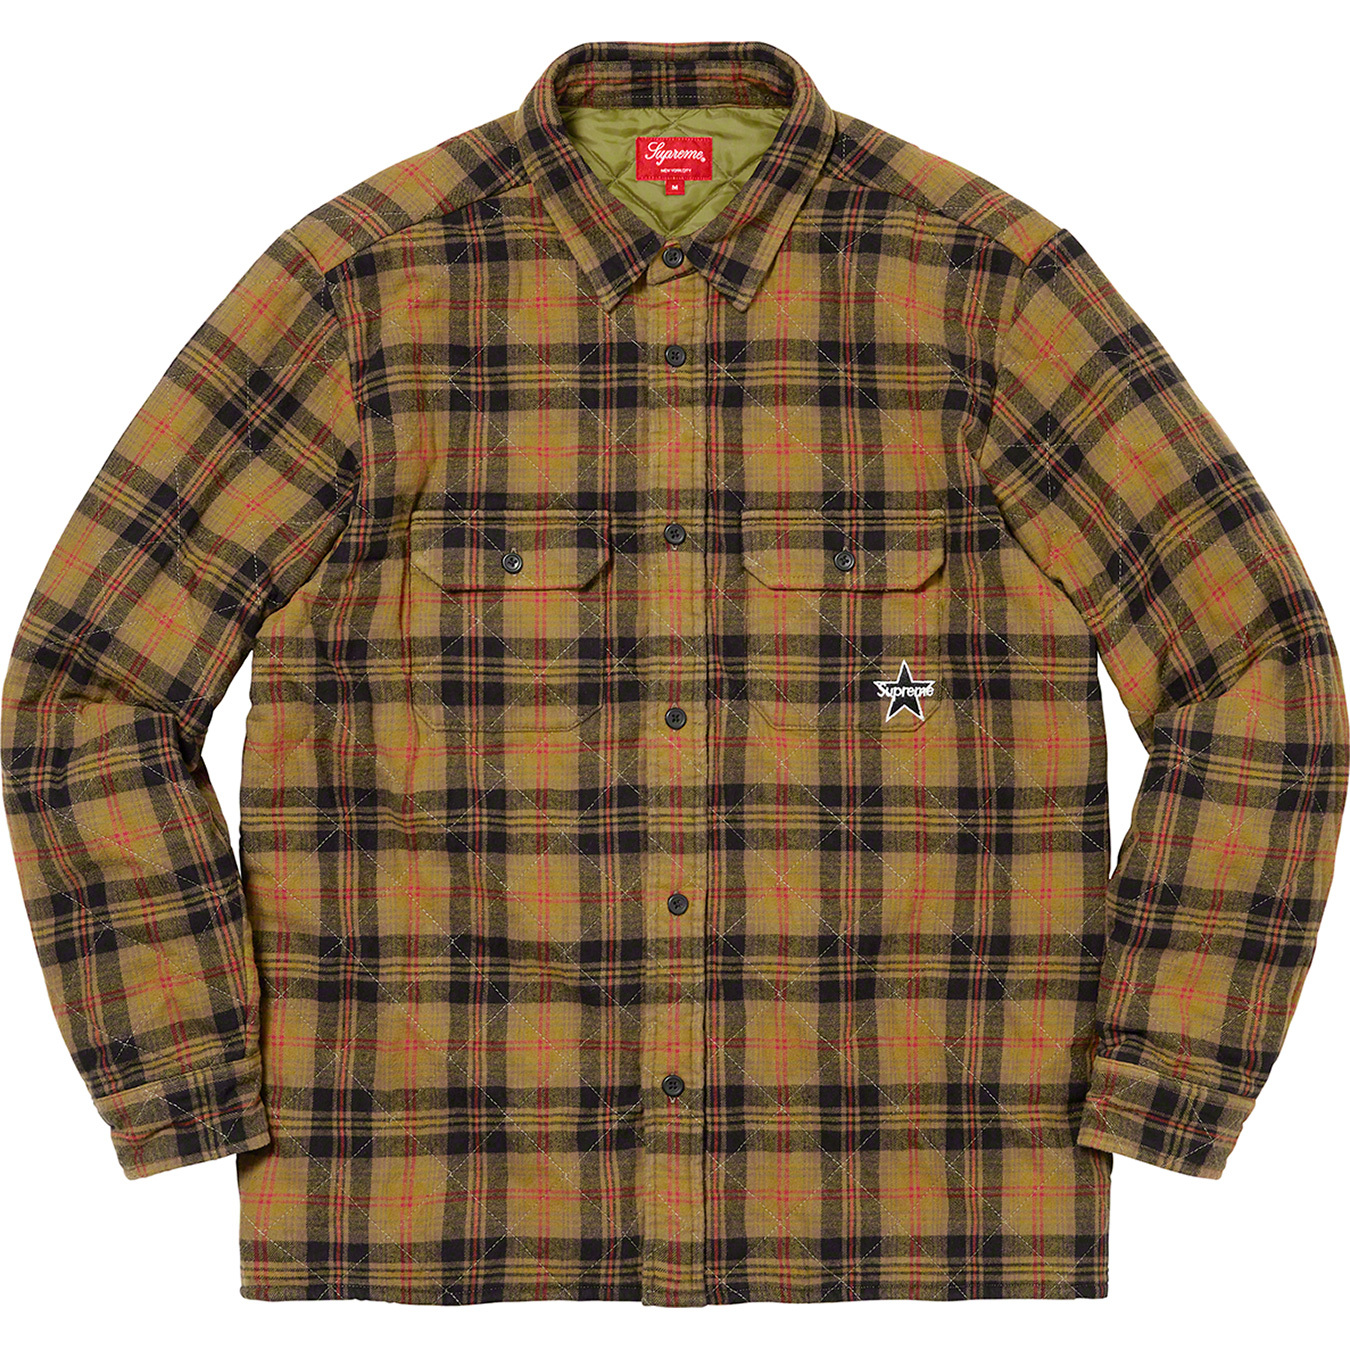 Quilted Plaid Flannel Shirt - Supreme Community